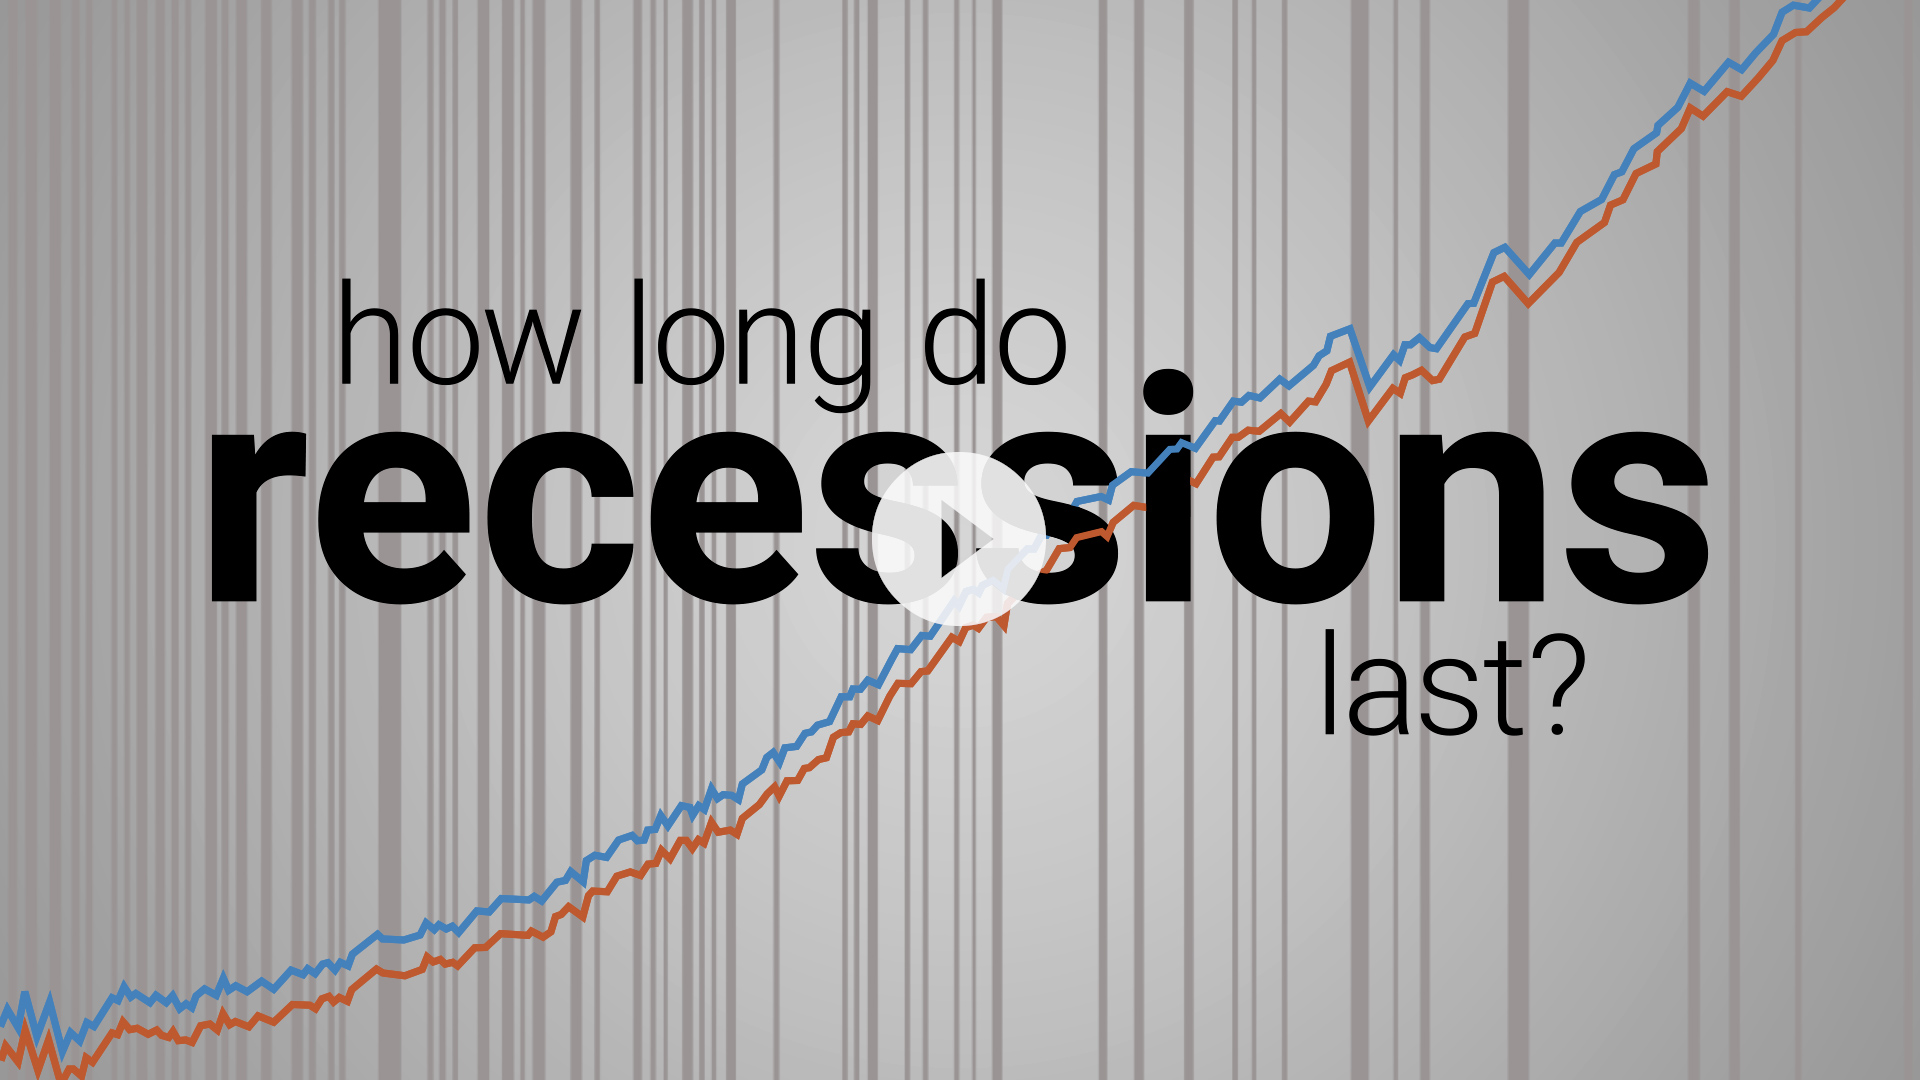 How long do recessions last_Thumb_PLAY button